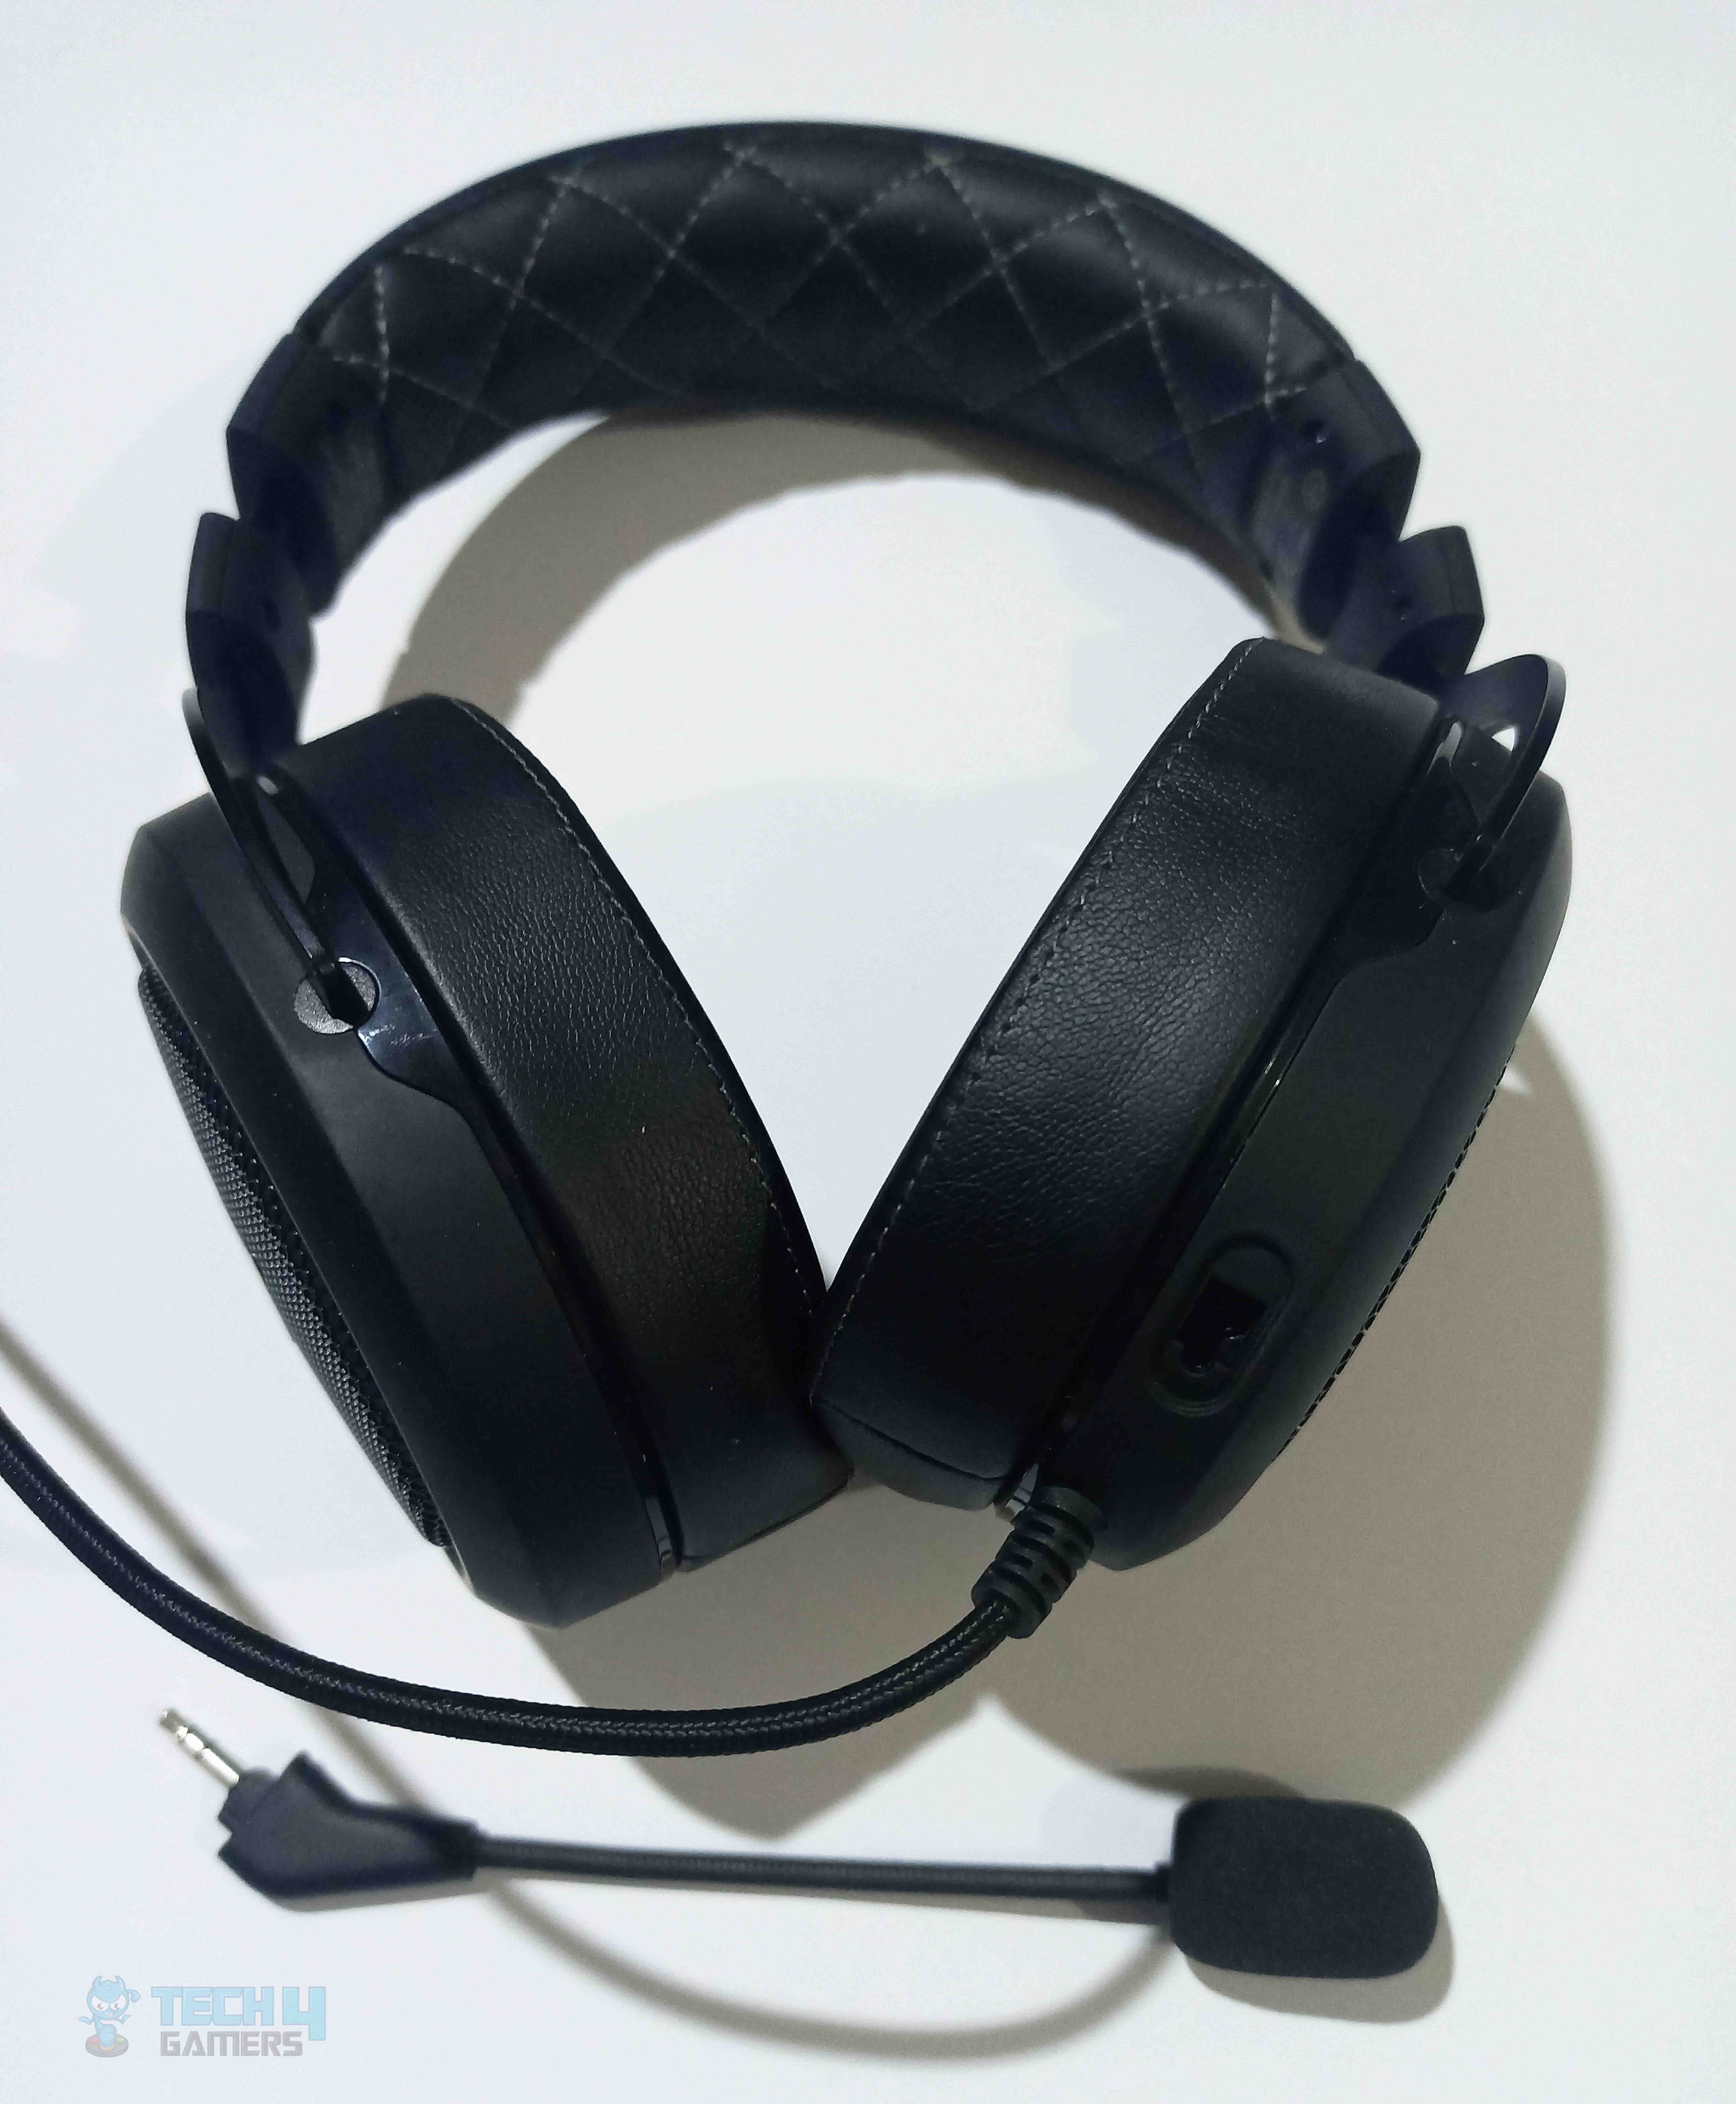 The Front Design of the HS60 PRO Headset